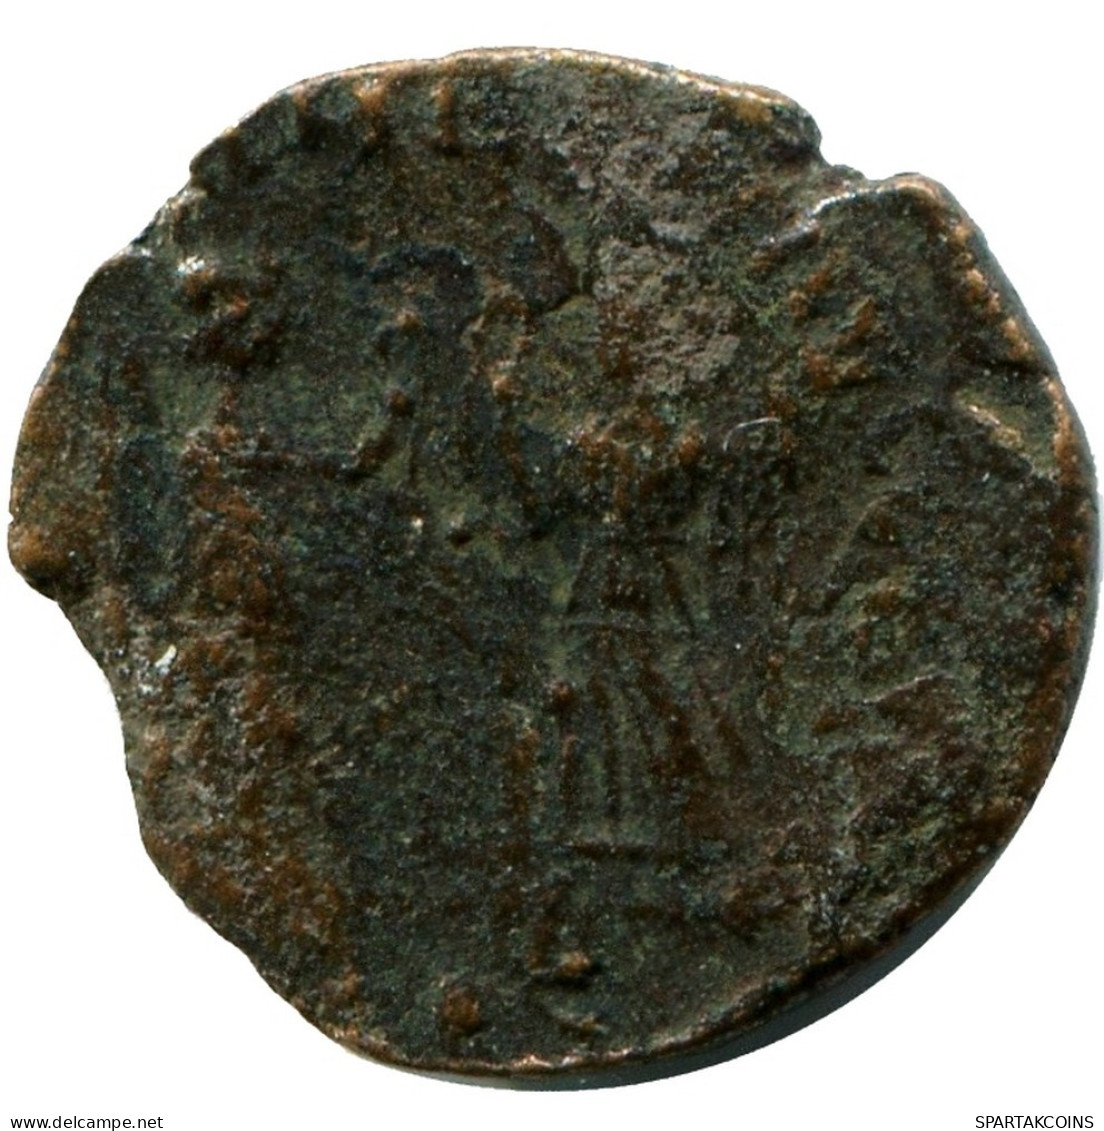 CONSTANS MINTED IN ROME ITALY FROM THE ROYAL ONTARIO MUSEUM #ANC11498.14.E.A - L'Empire Chrétien (307 à 363)